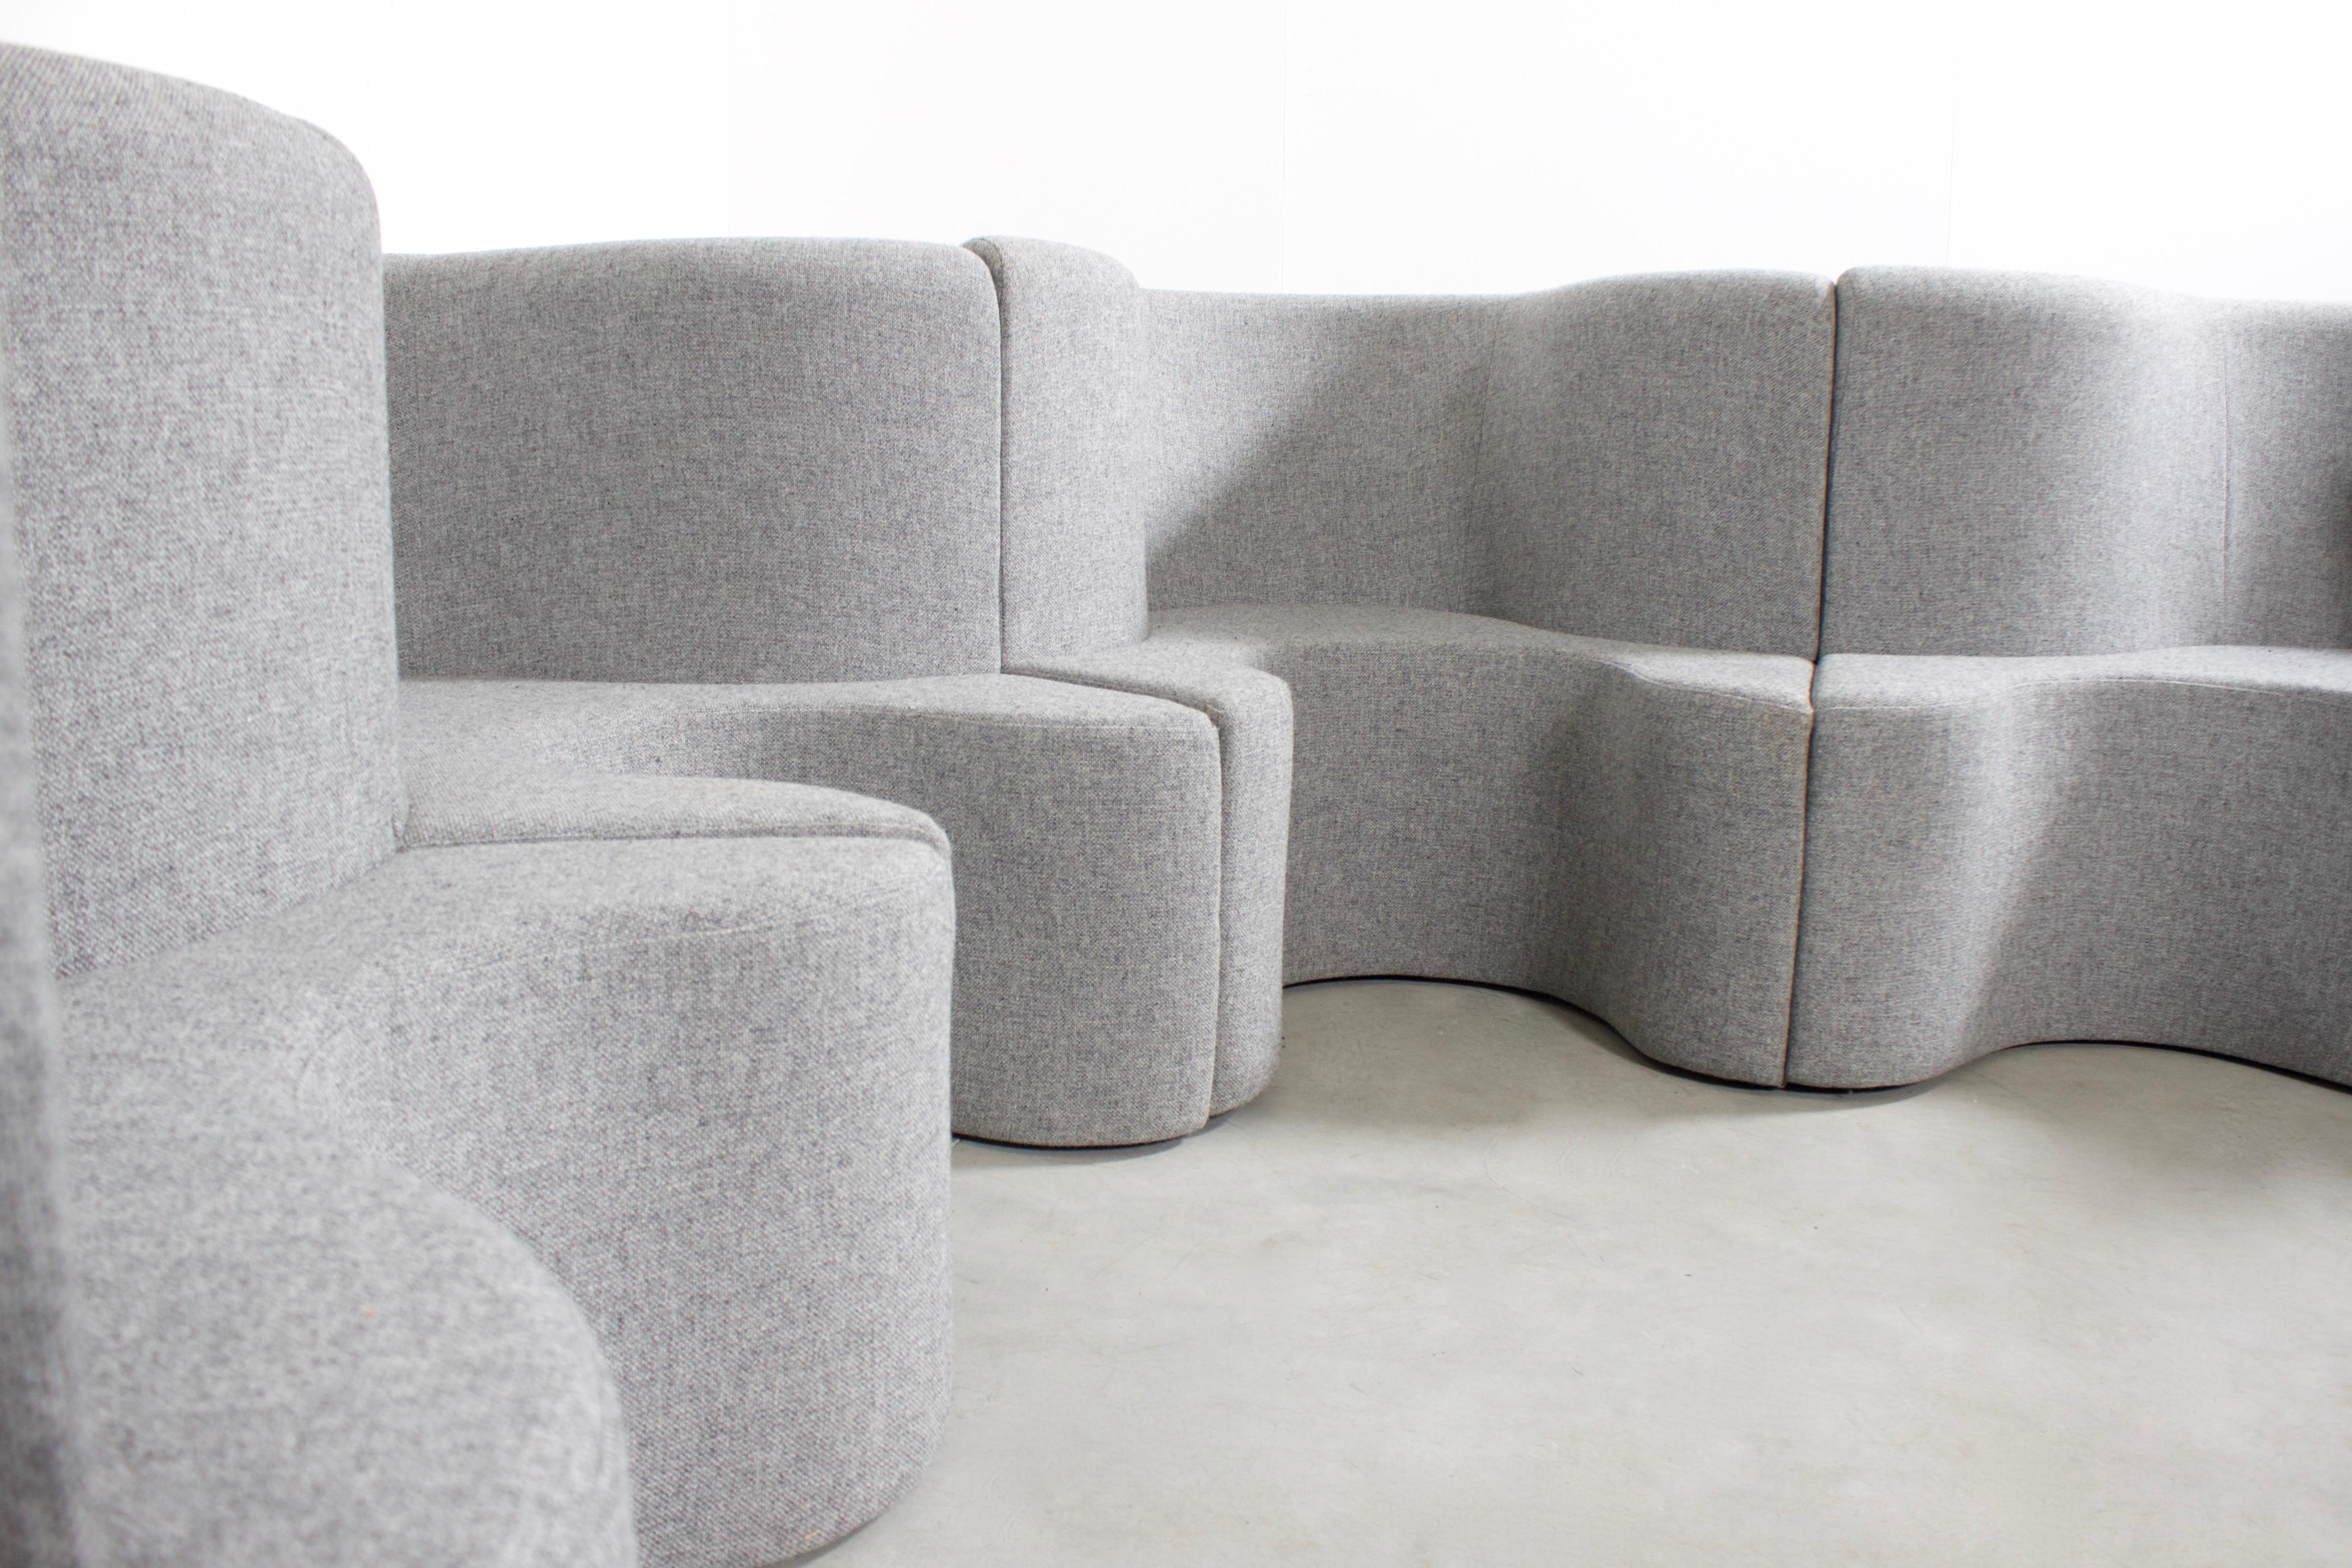 Impressive Clover Leaf Sectional Sofa by Verner Panton in Grey Fabric 1